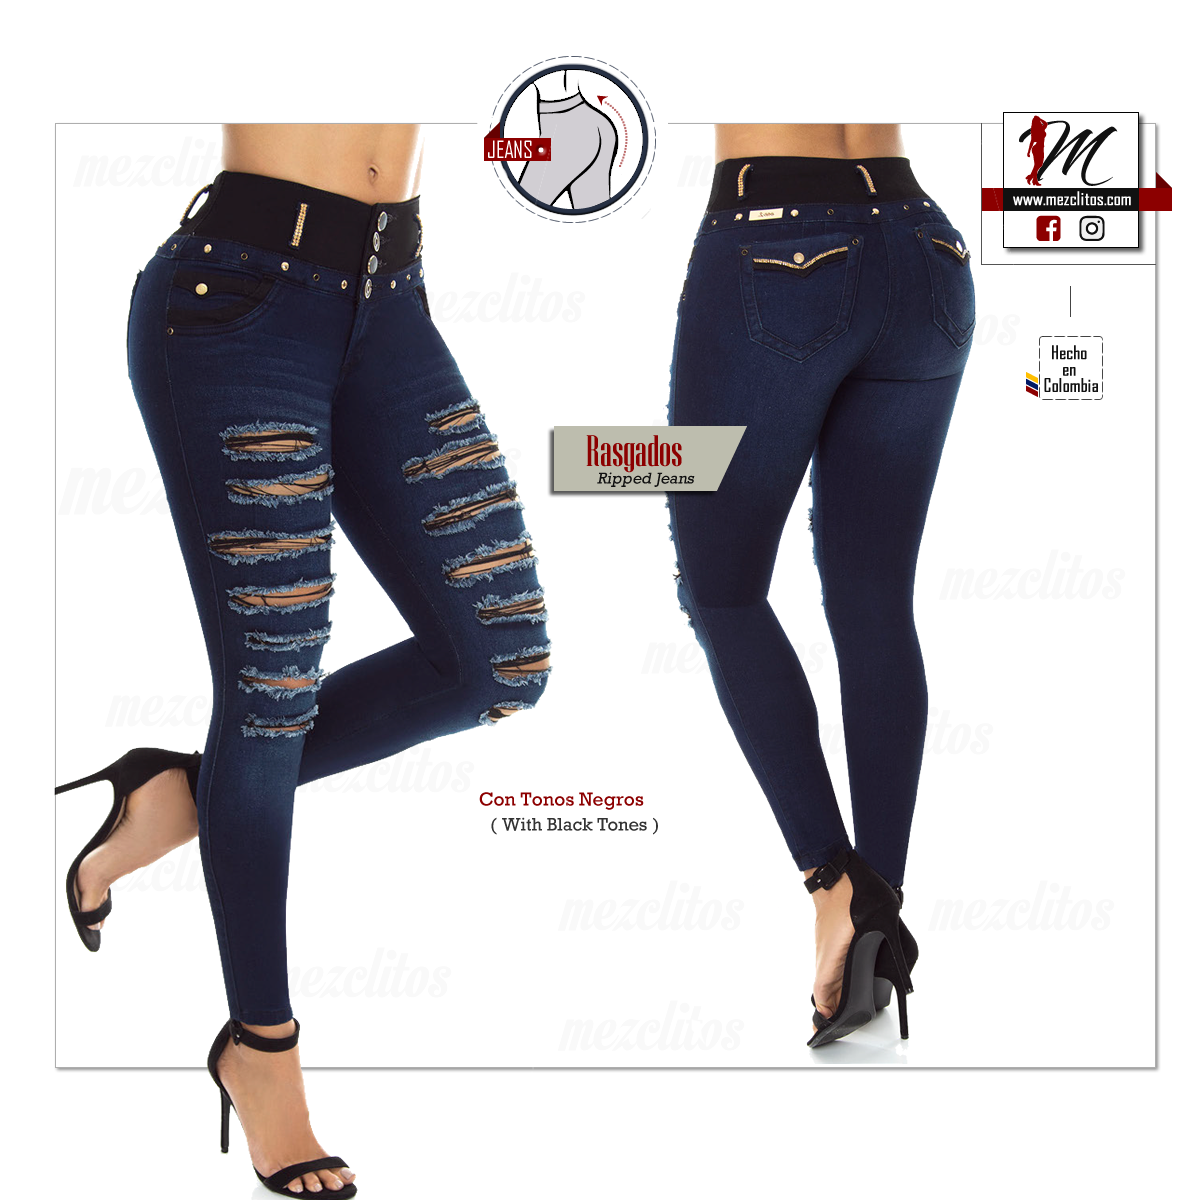 ENE2 Jeans 901249 - 100% Colombianos